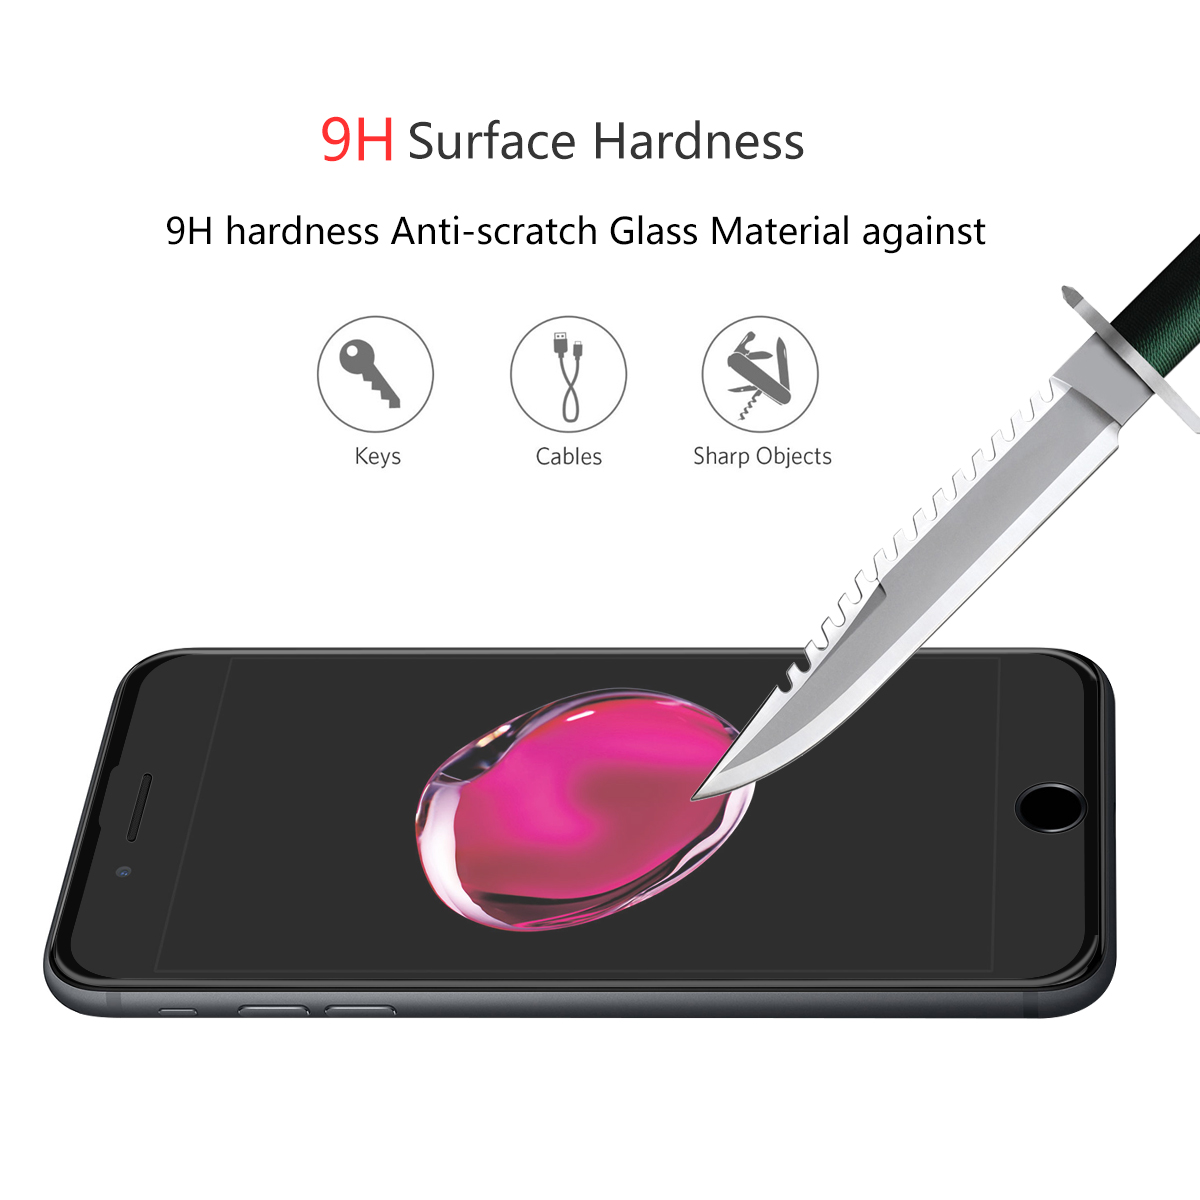 Enkay-02mm-6D-Curved-Edge-Soft-TPU-Tempered-Glass-Screen-Protector-For-iPhone-7iPhone-8-1335386-3